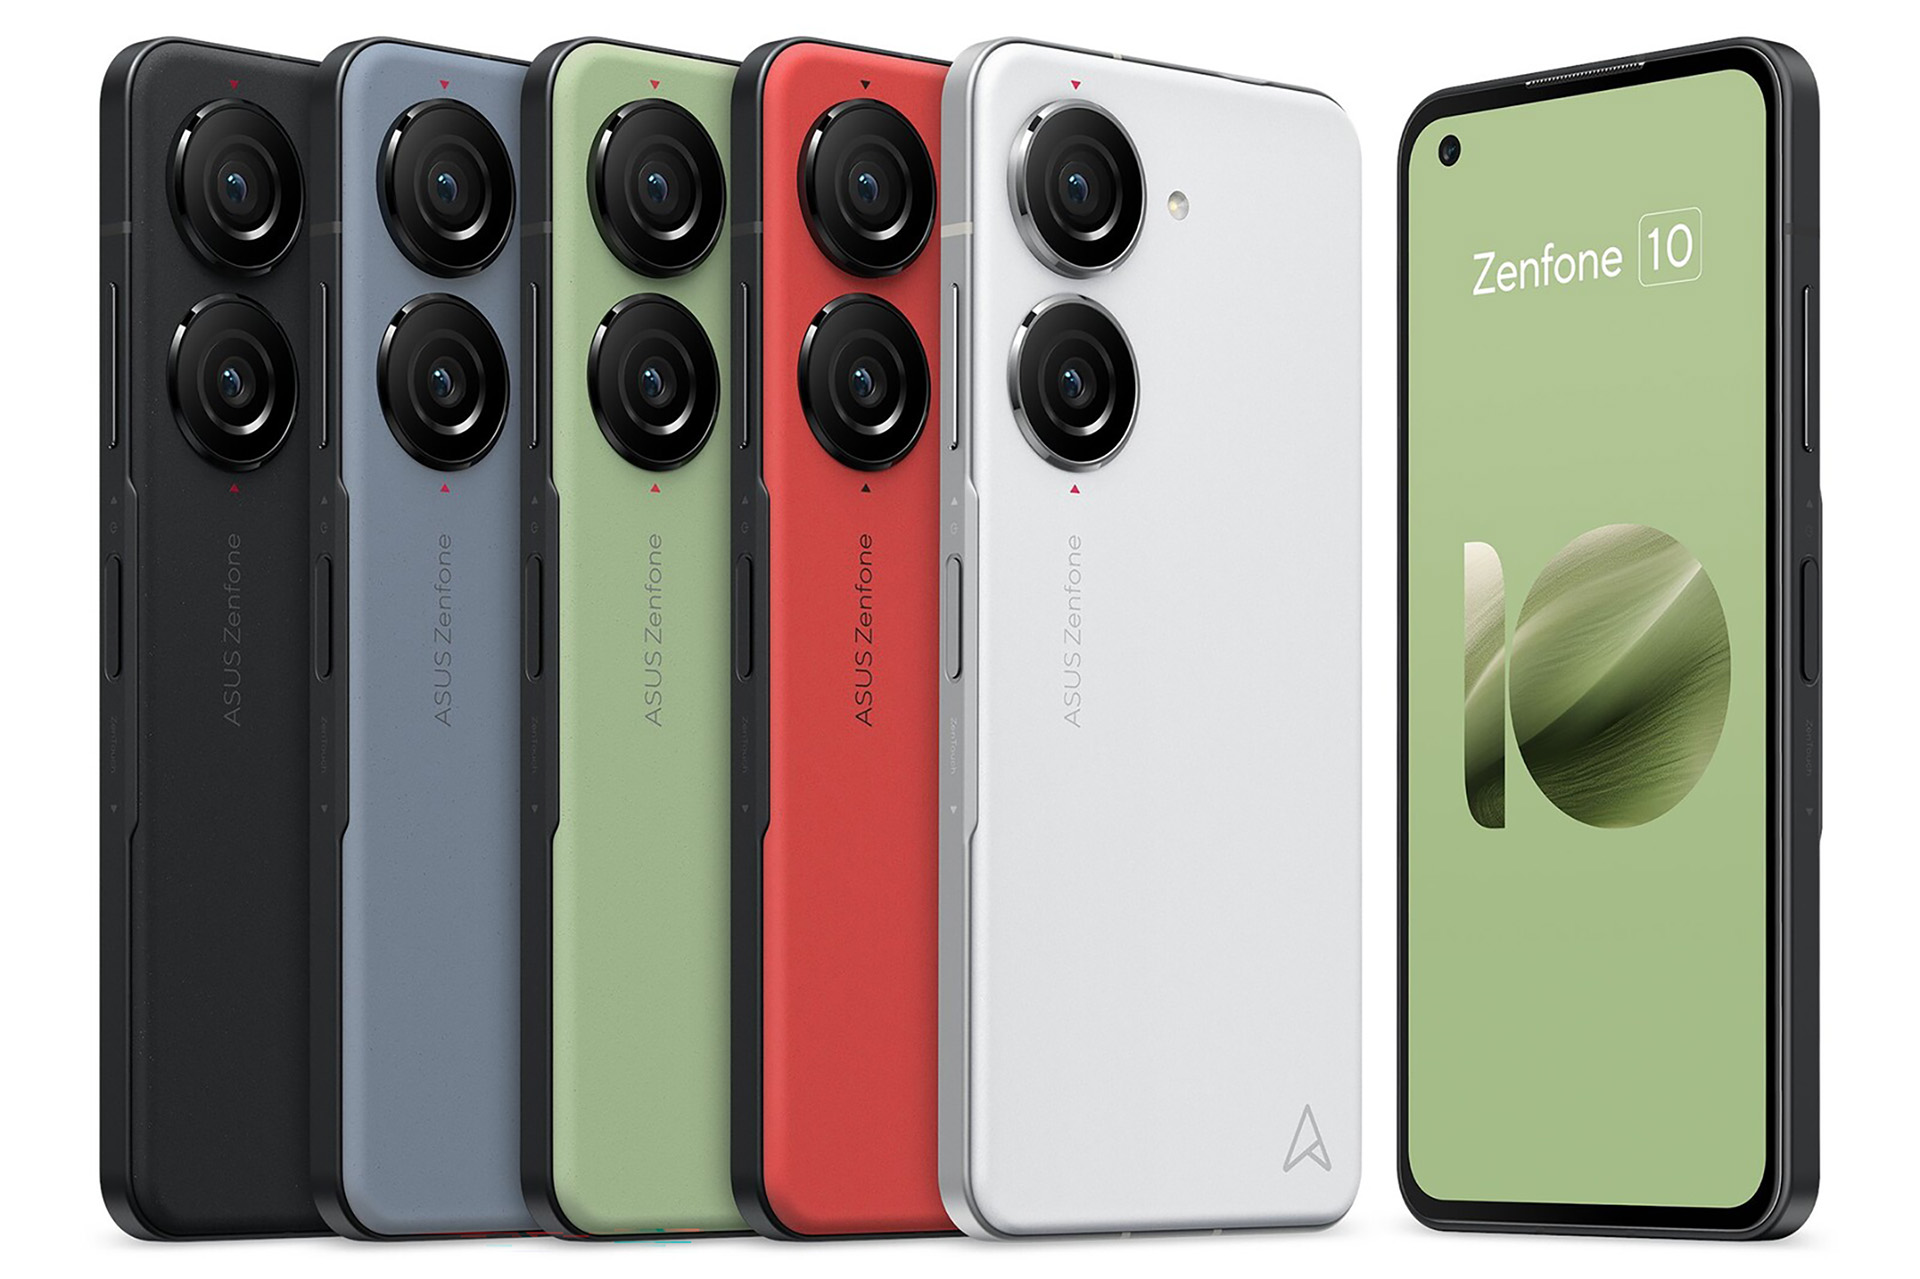 Asus Zenfone 10's specs surface with more renders, confirm 3.5mm headphone jack